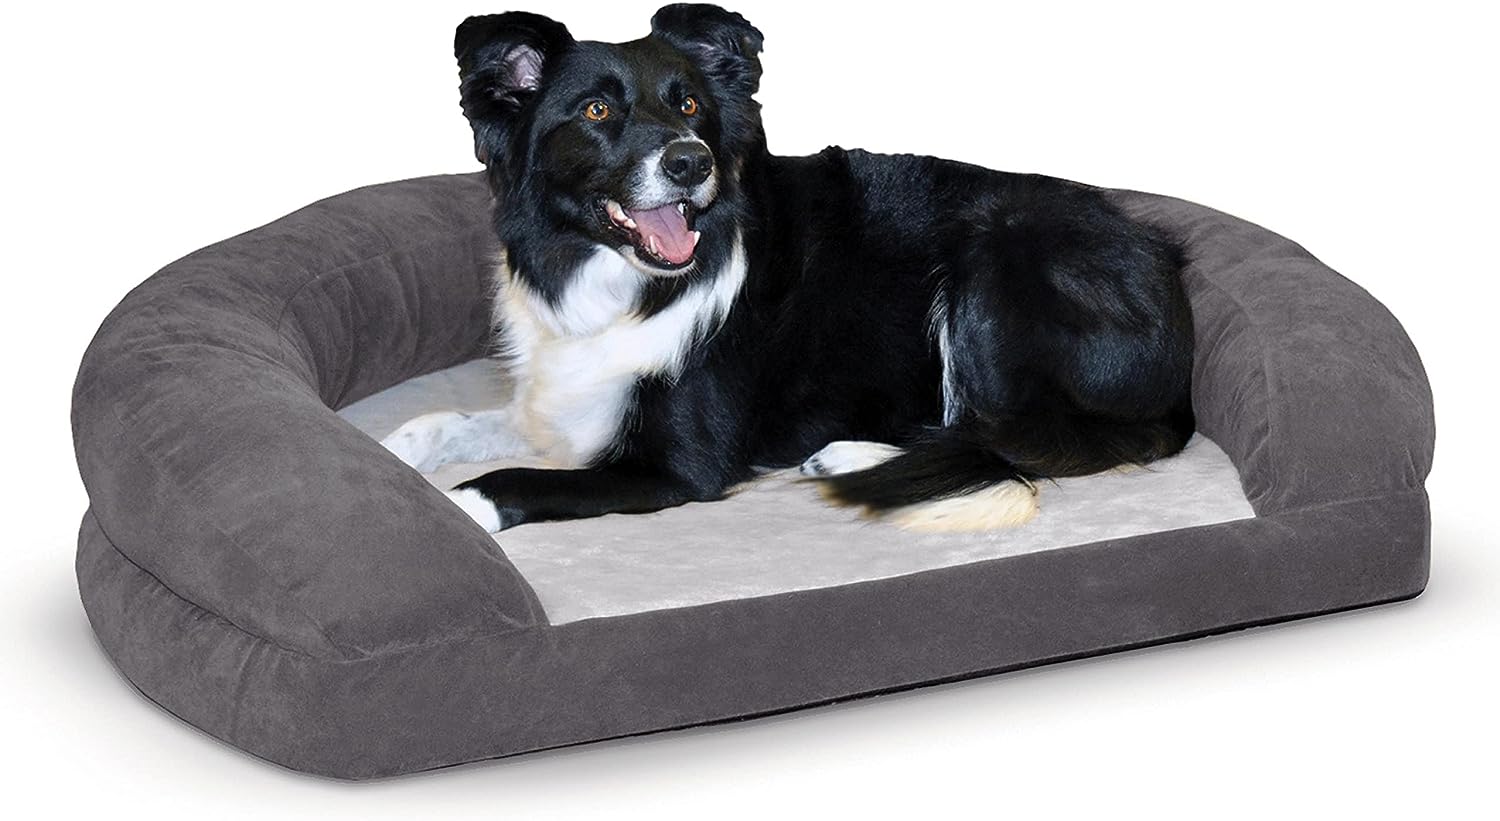 K&H Pet Products Orthopedic Bolster Dog Bed